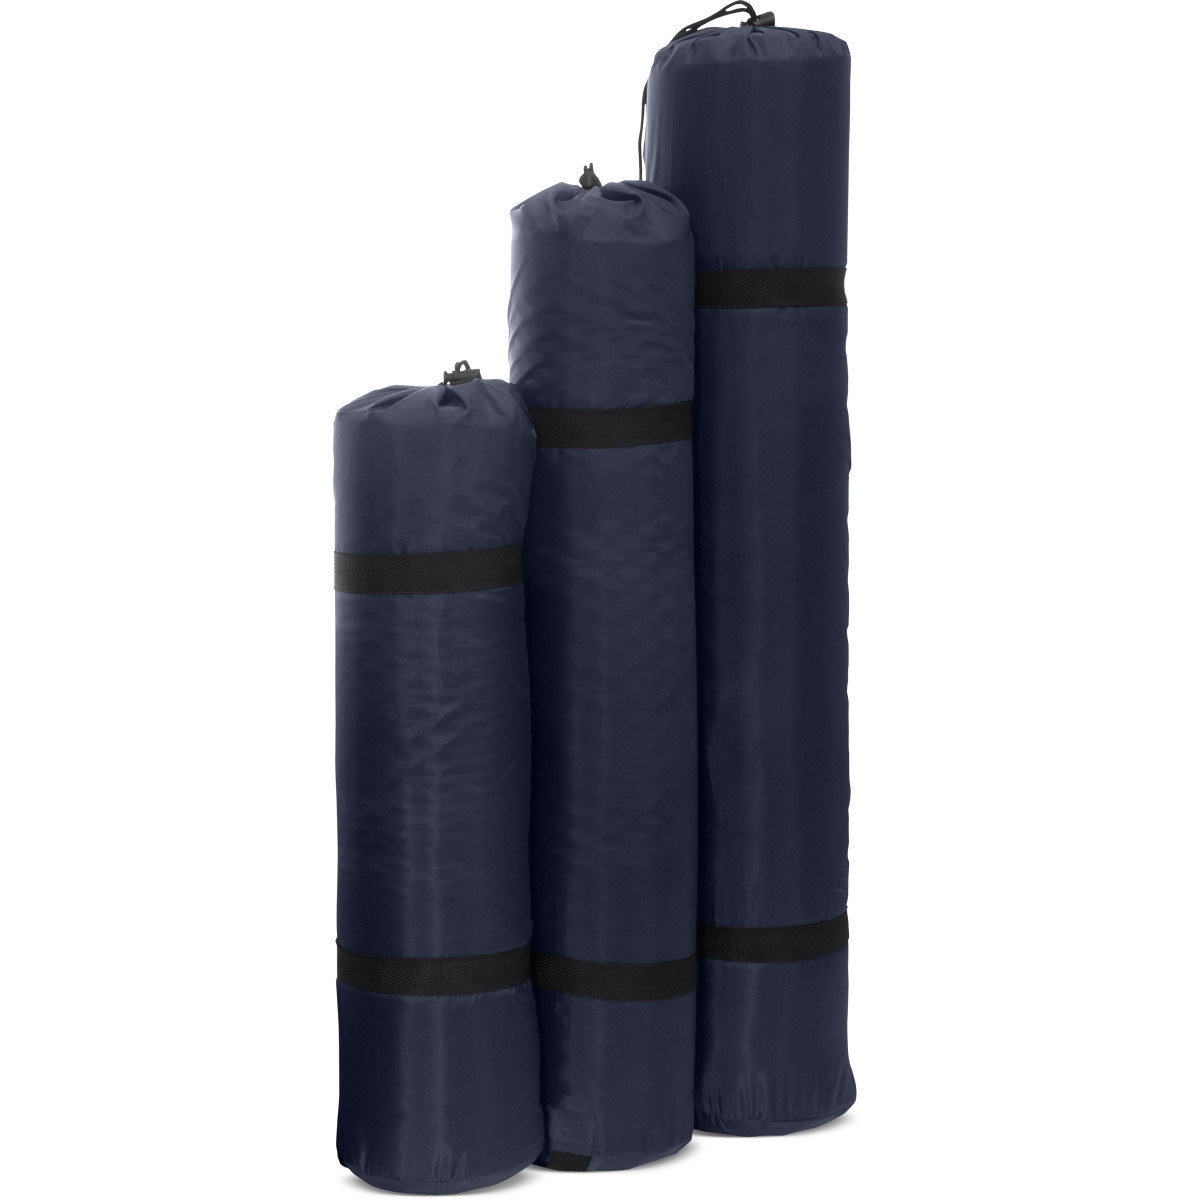 All three sizes of the basecamp sleeping pad rolled up and in stuff bags side by side